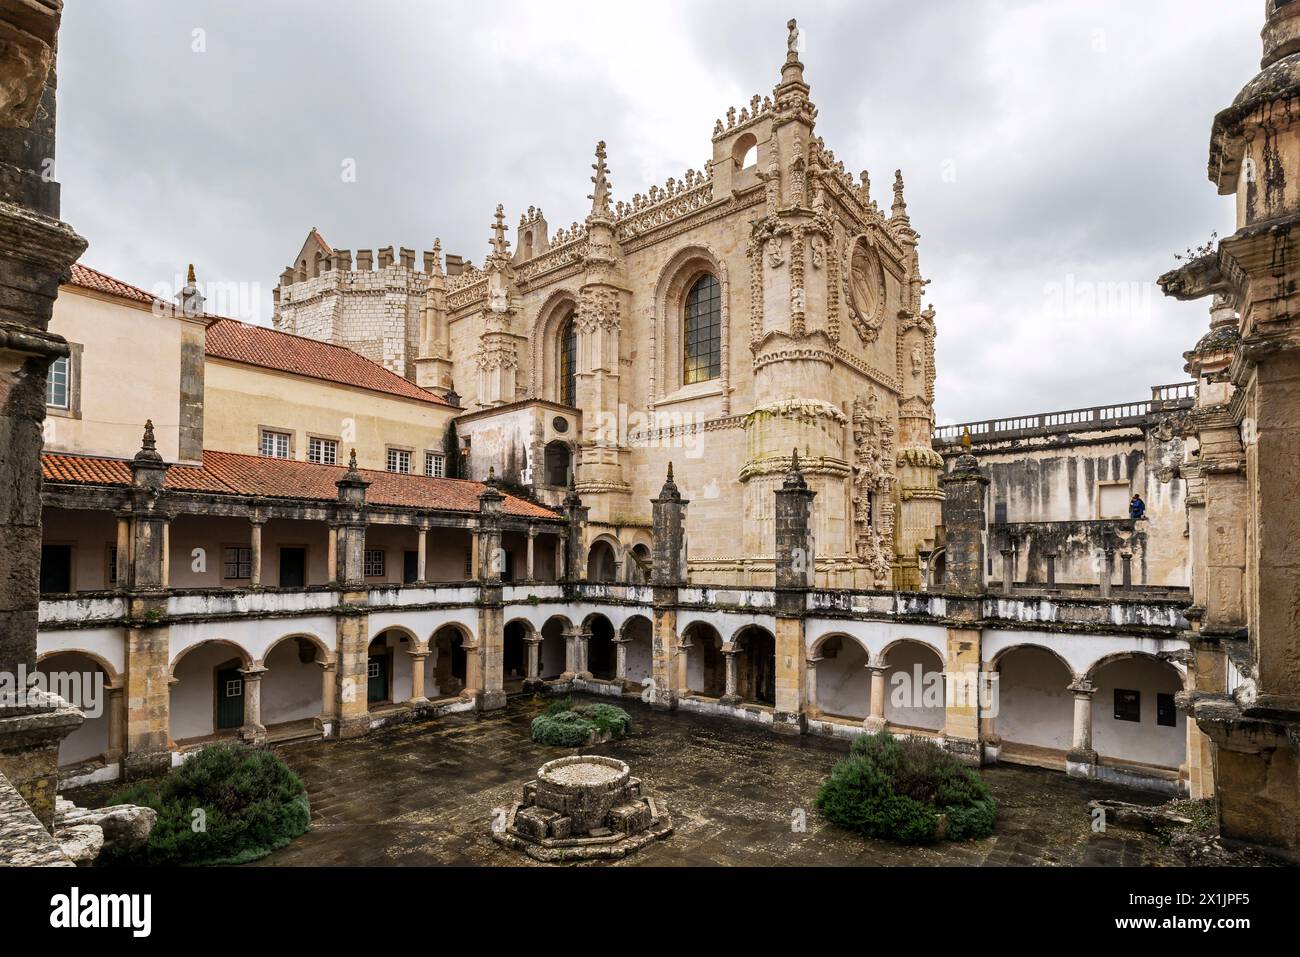 The Templar Castle and the Convent of the Knights of Christ in Tomar, Portugal is a unique monument in the history of the western world. Stock Photo